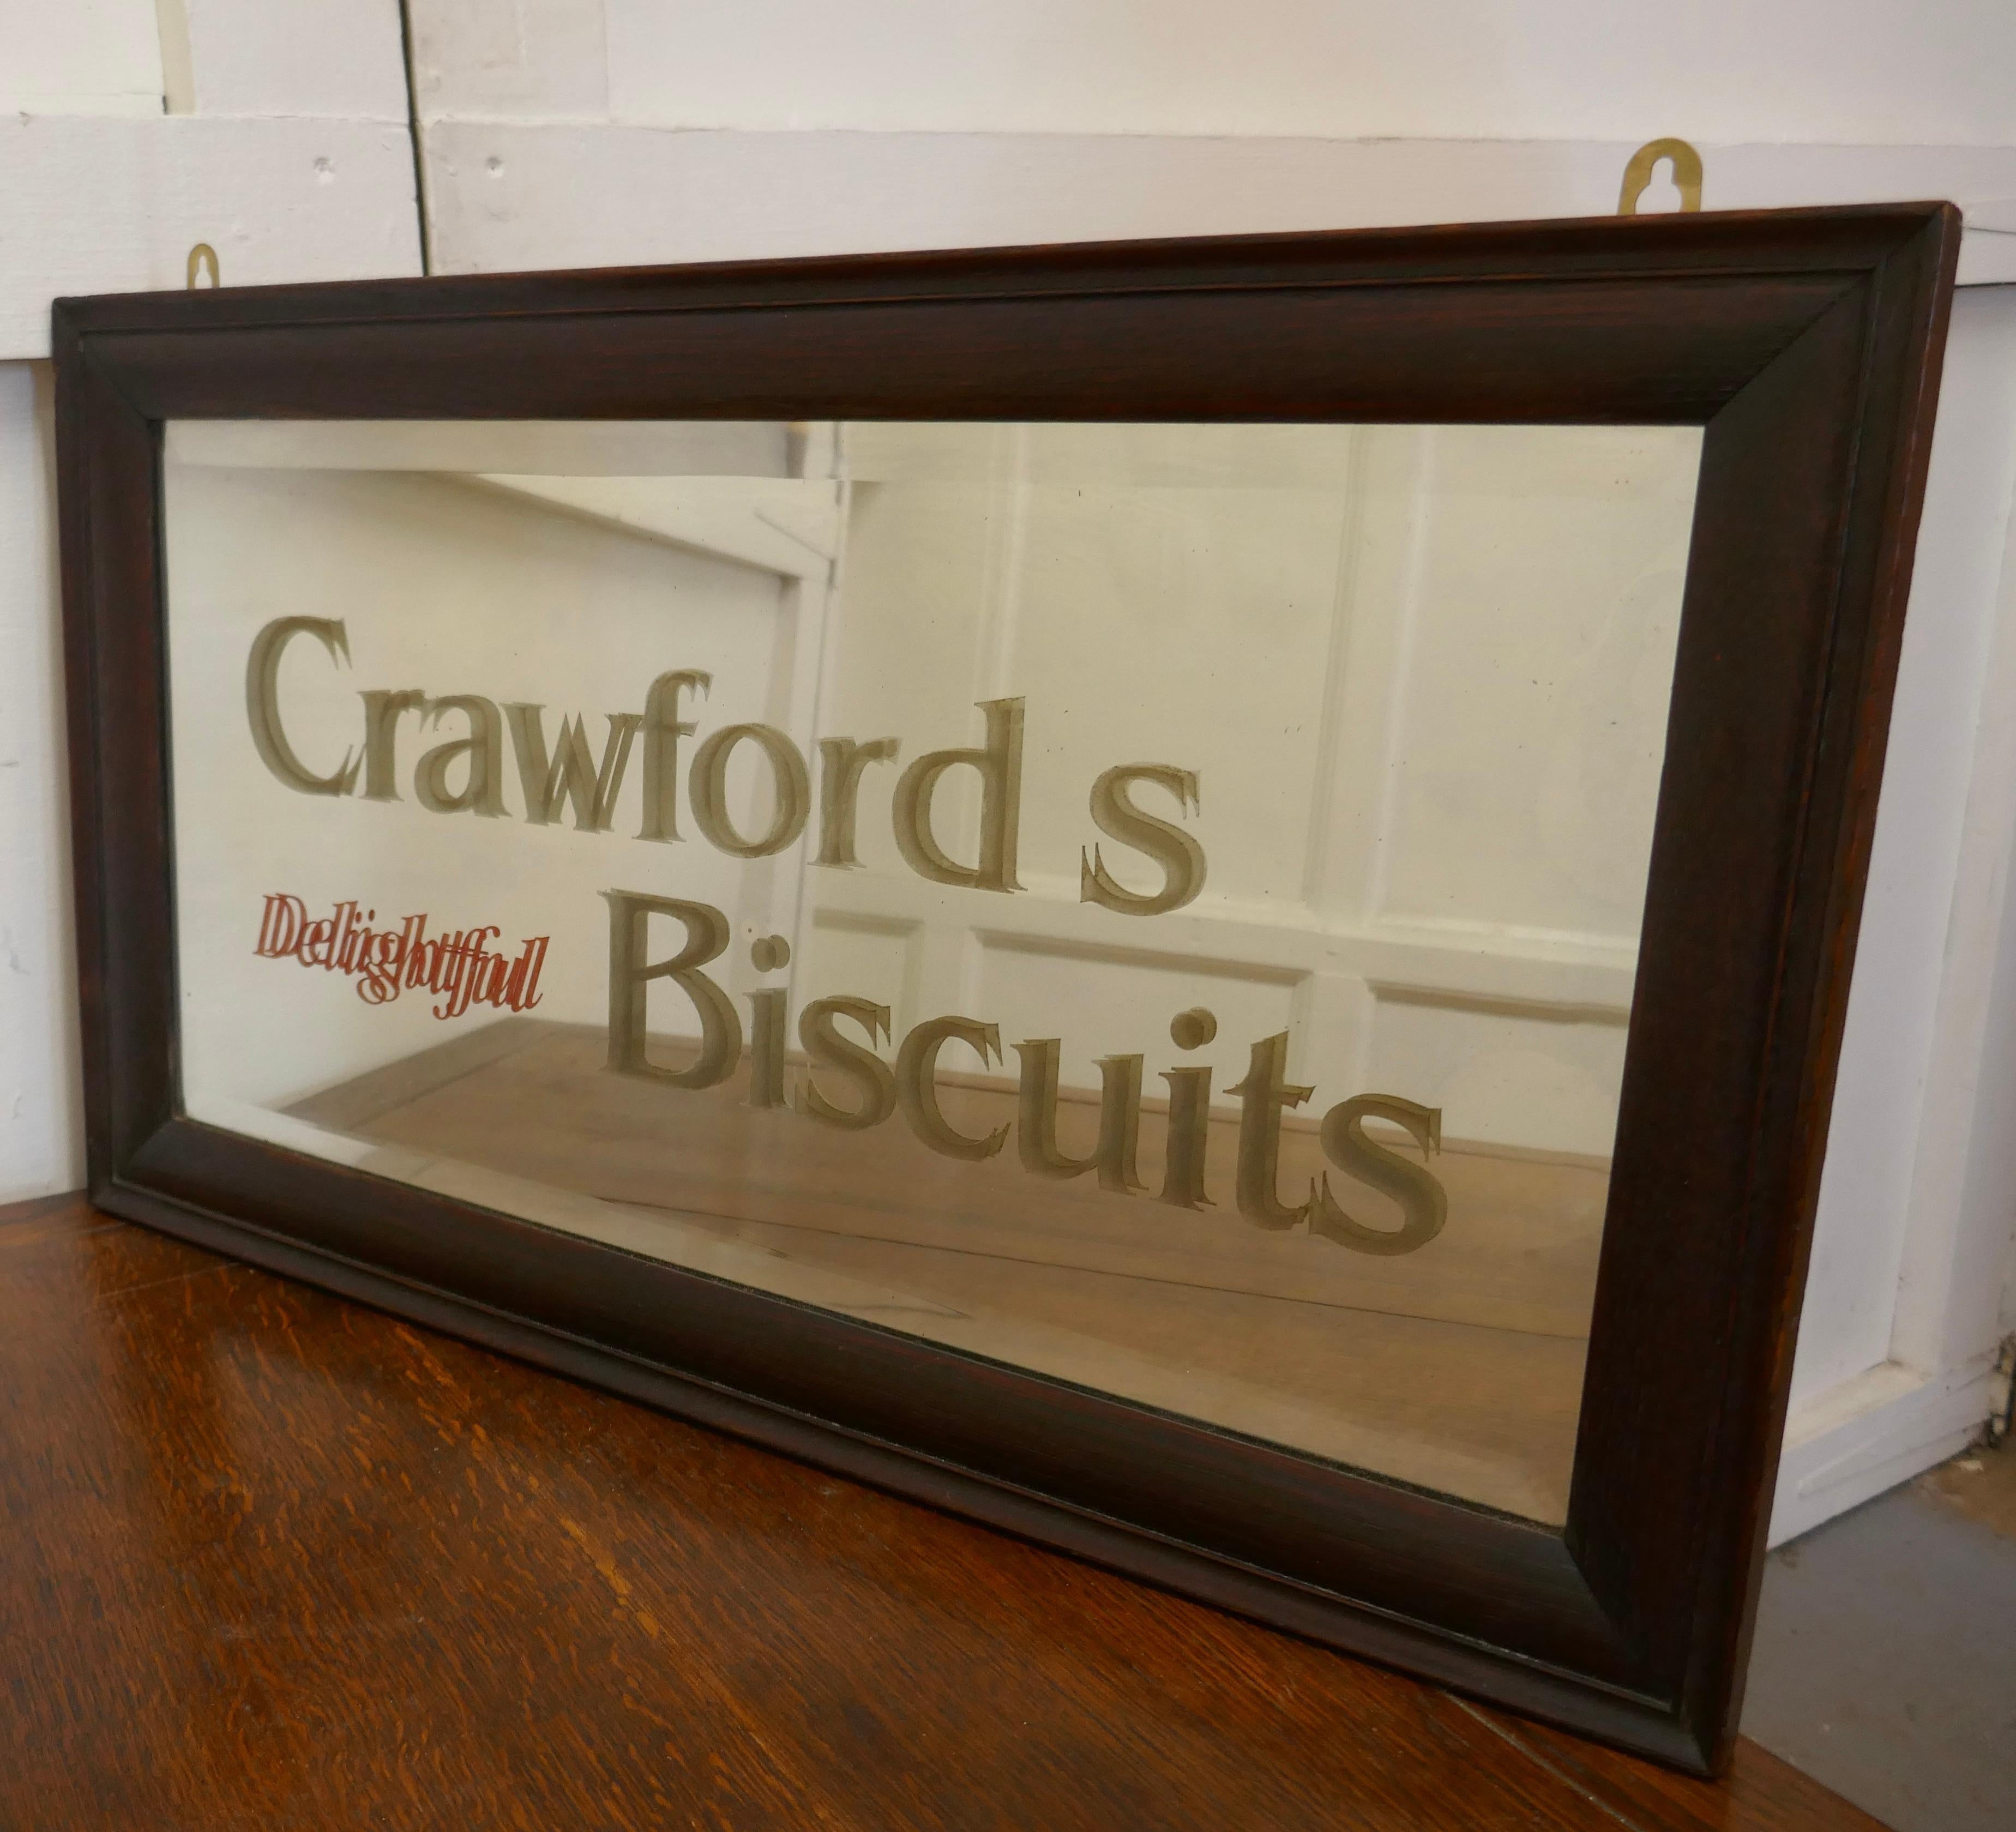 “Crawford’s Delightful Biscuits” Baker/Cafe Advertising Mirror For Sale 1